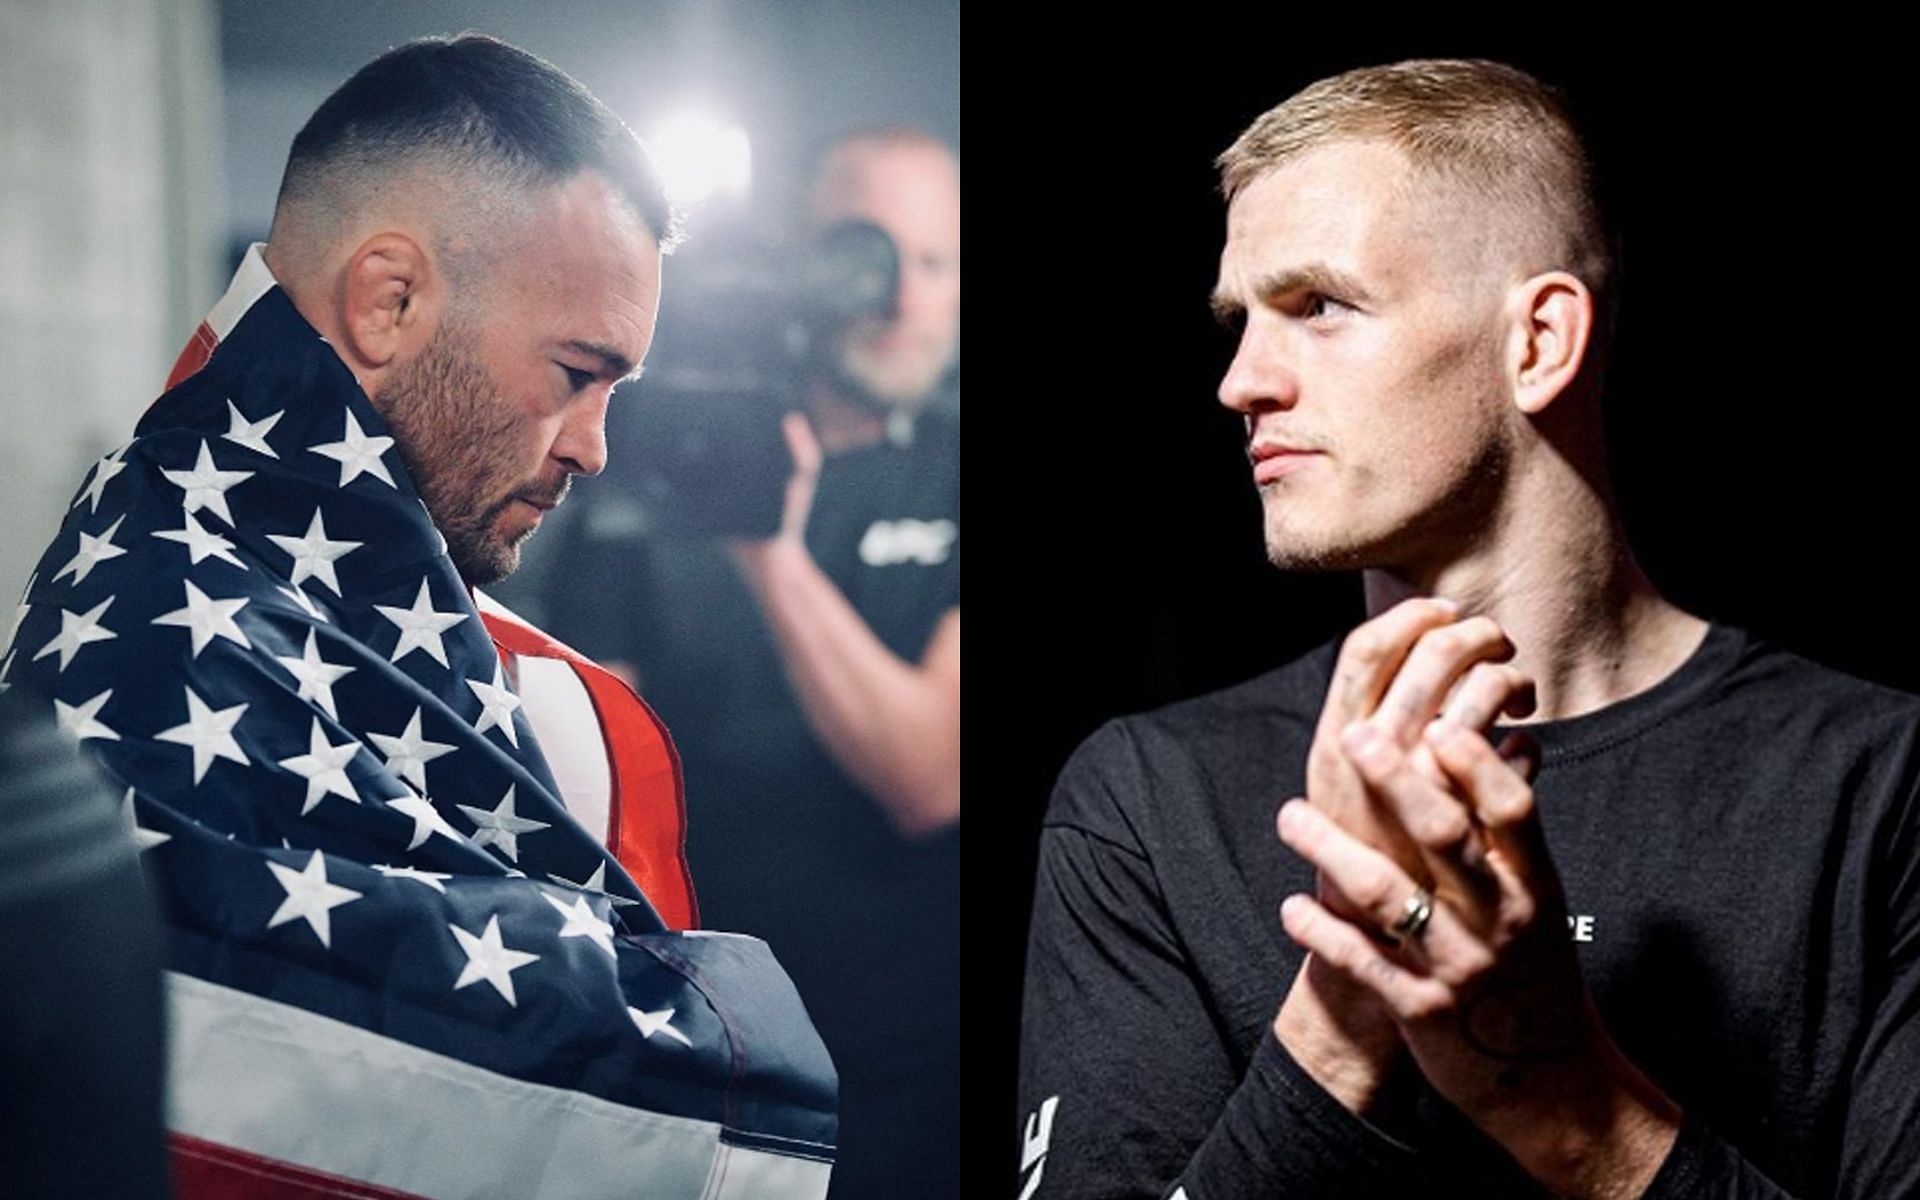 Ian Garry (right) has been campaigning for a fight against Colby Covington (left) [Images Courtesy: @colbycovington and @iangarry Instagram]